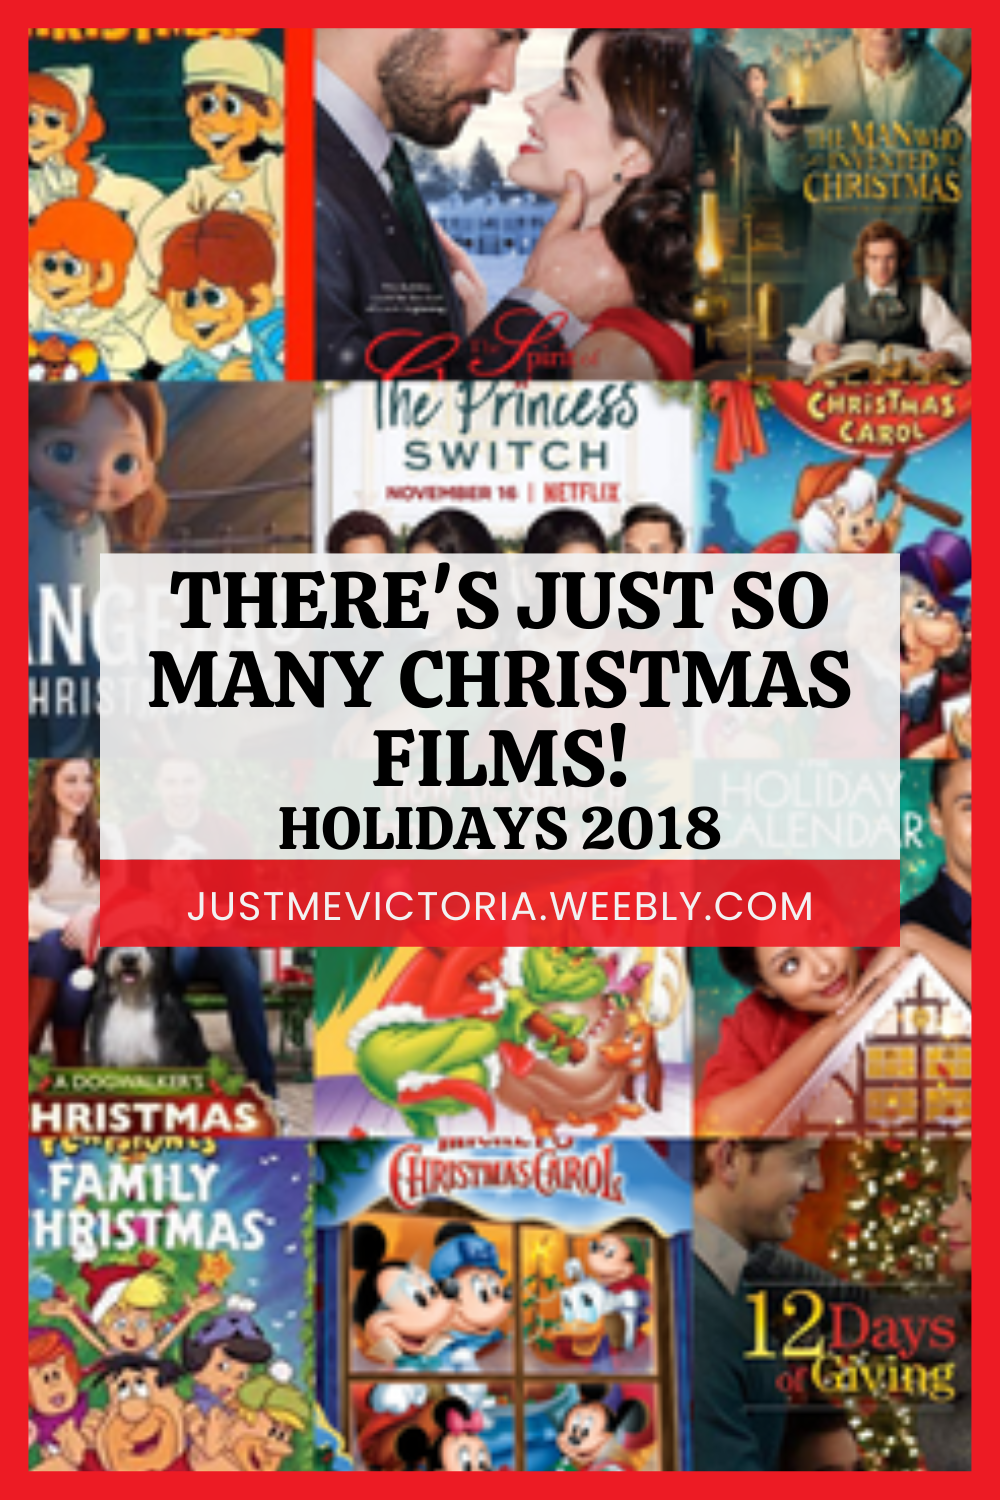 There's Just So Many Christmas Films!